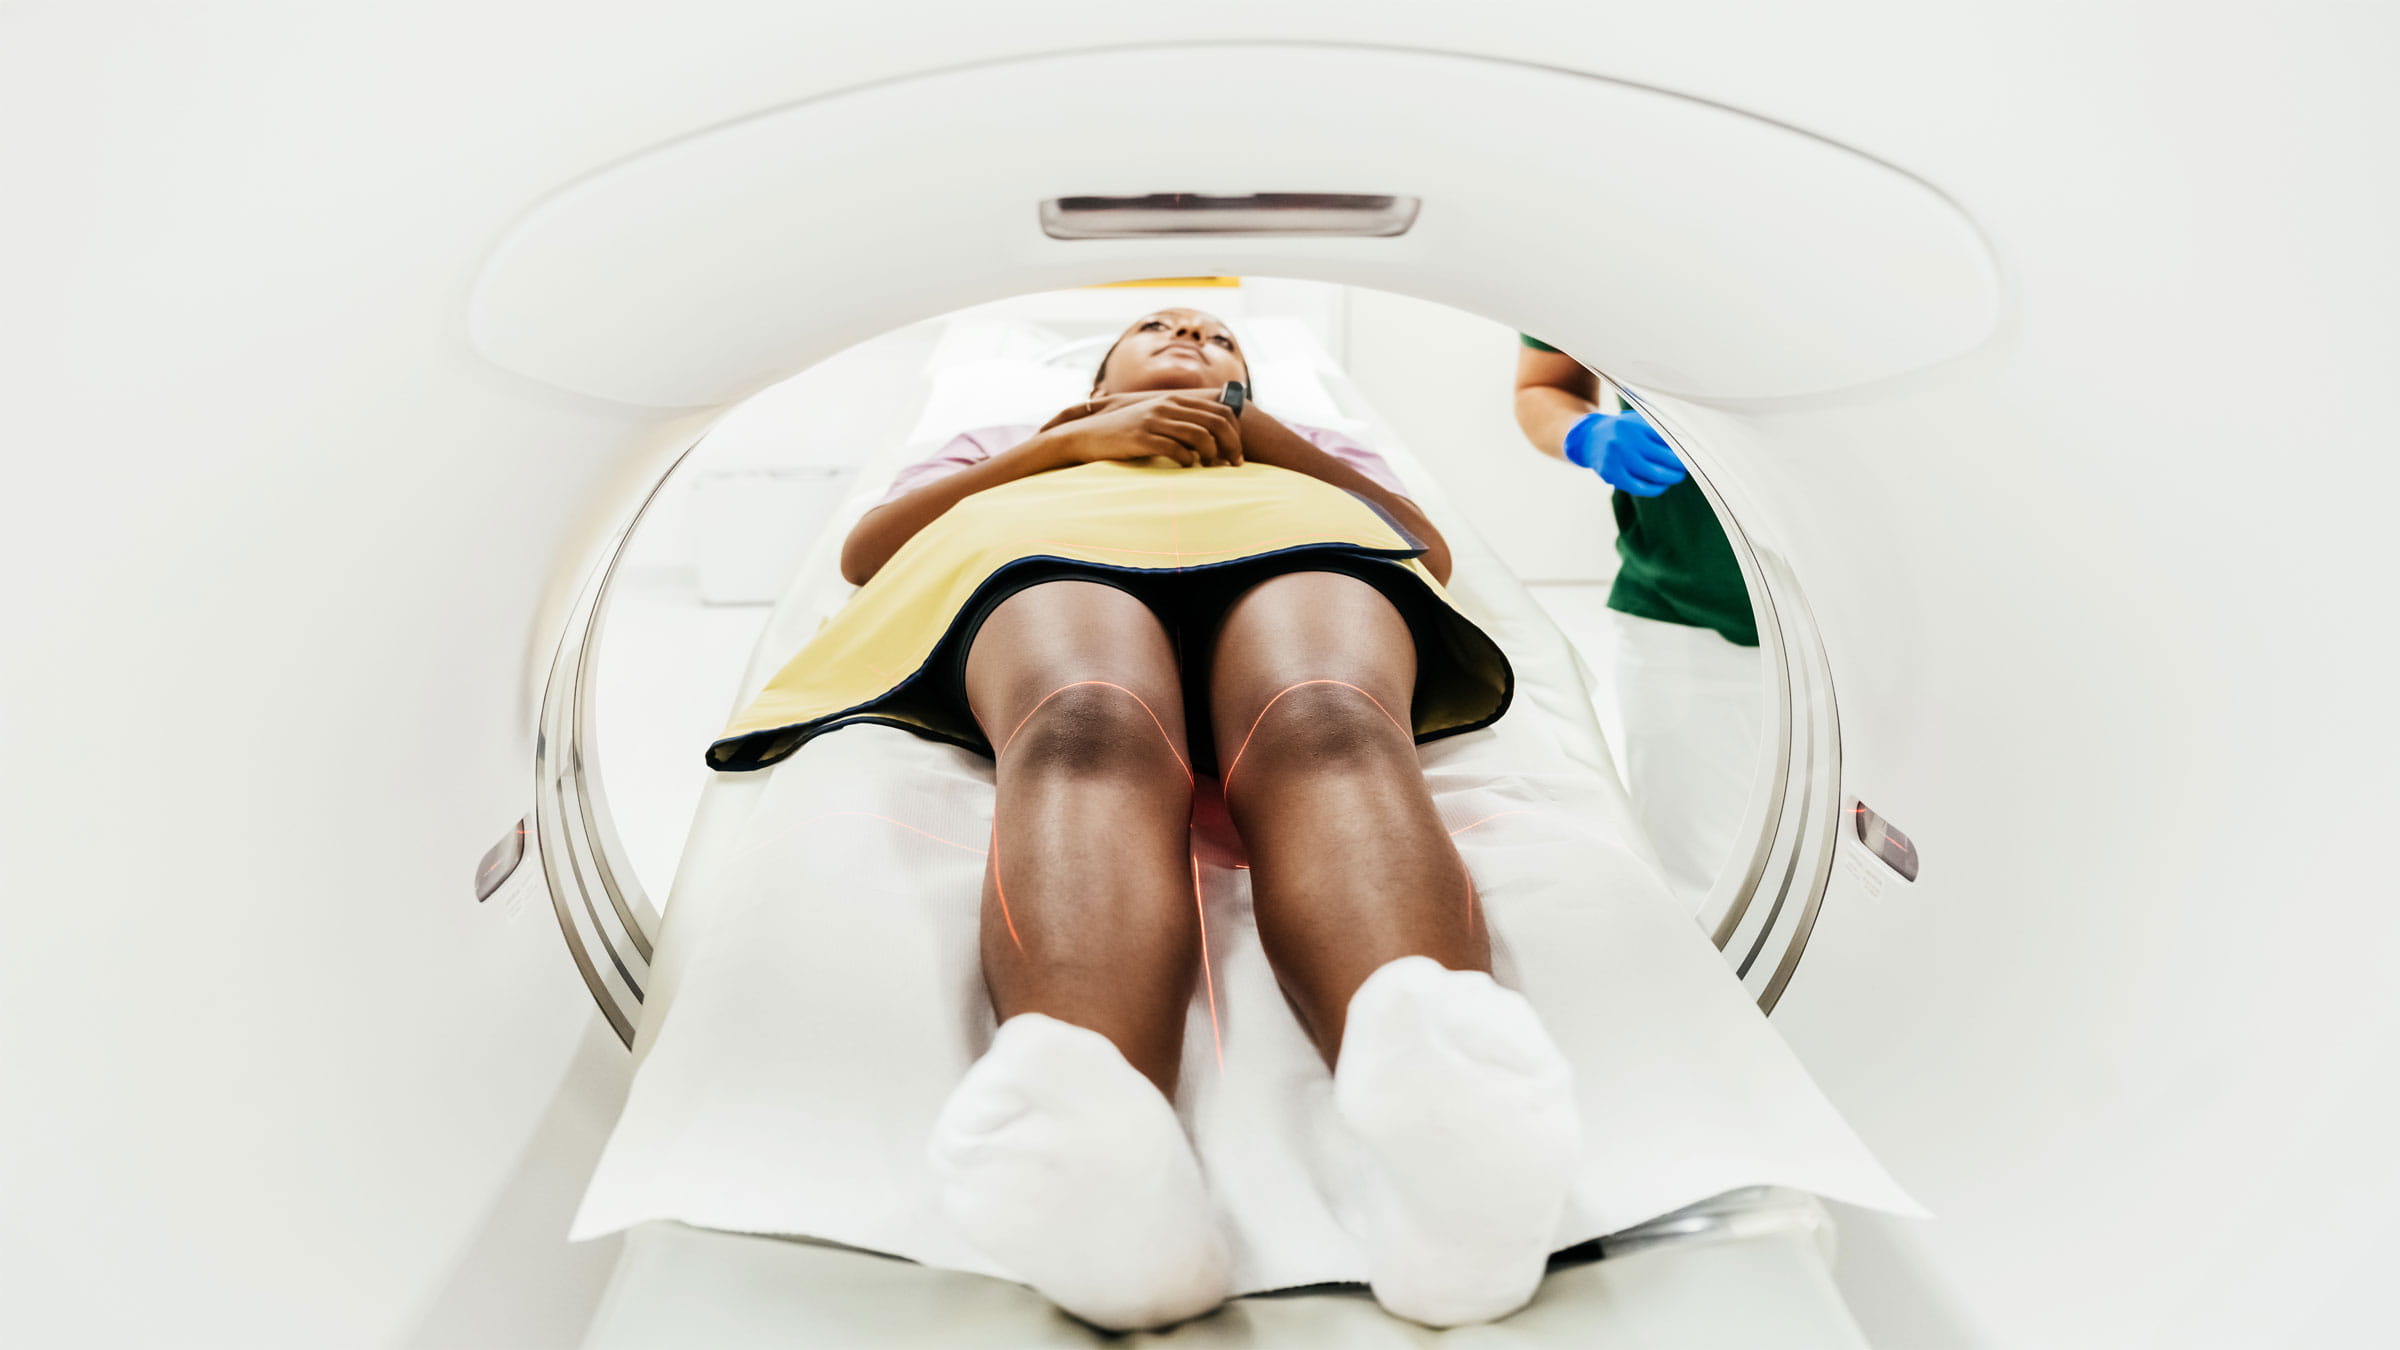 A Black female patient enters an MRI machine lying on her back on a table.